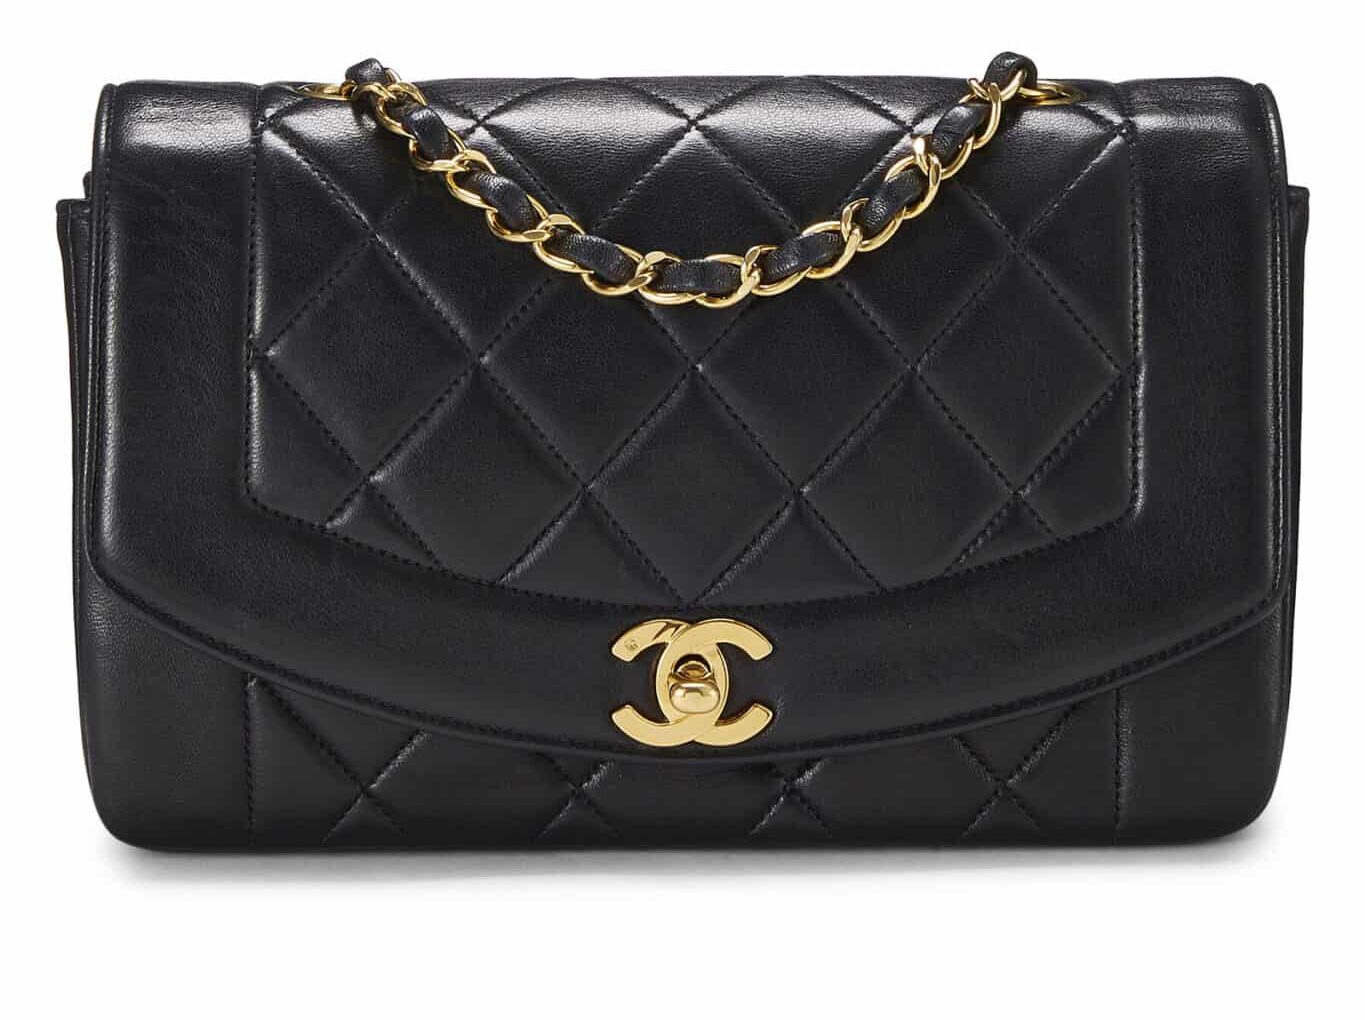 Chanel - Authenticated Timeless/Classique Handbag - Leather Black for Women, Very Good Condition